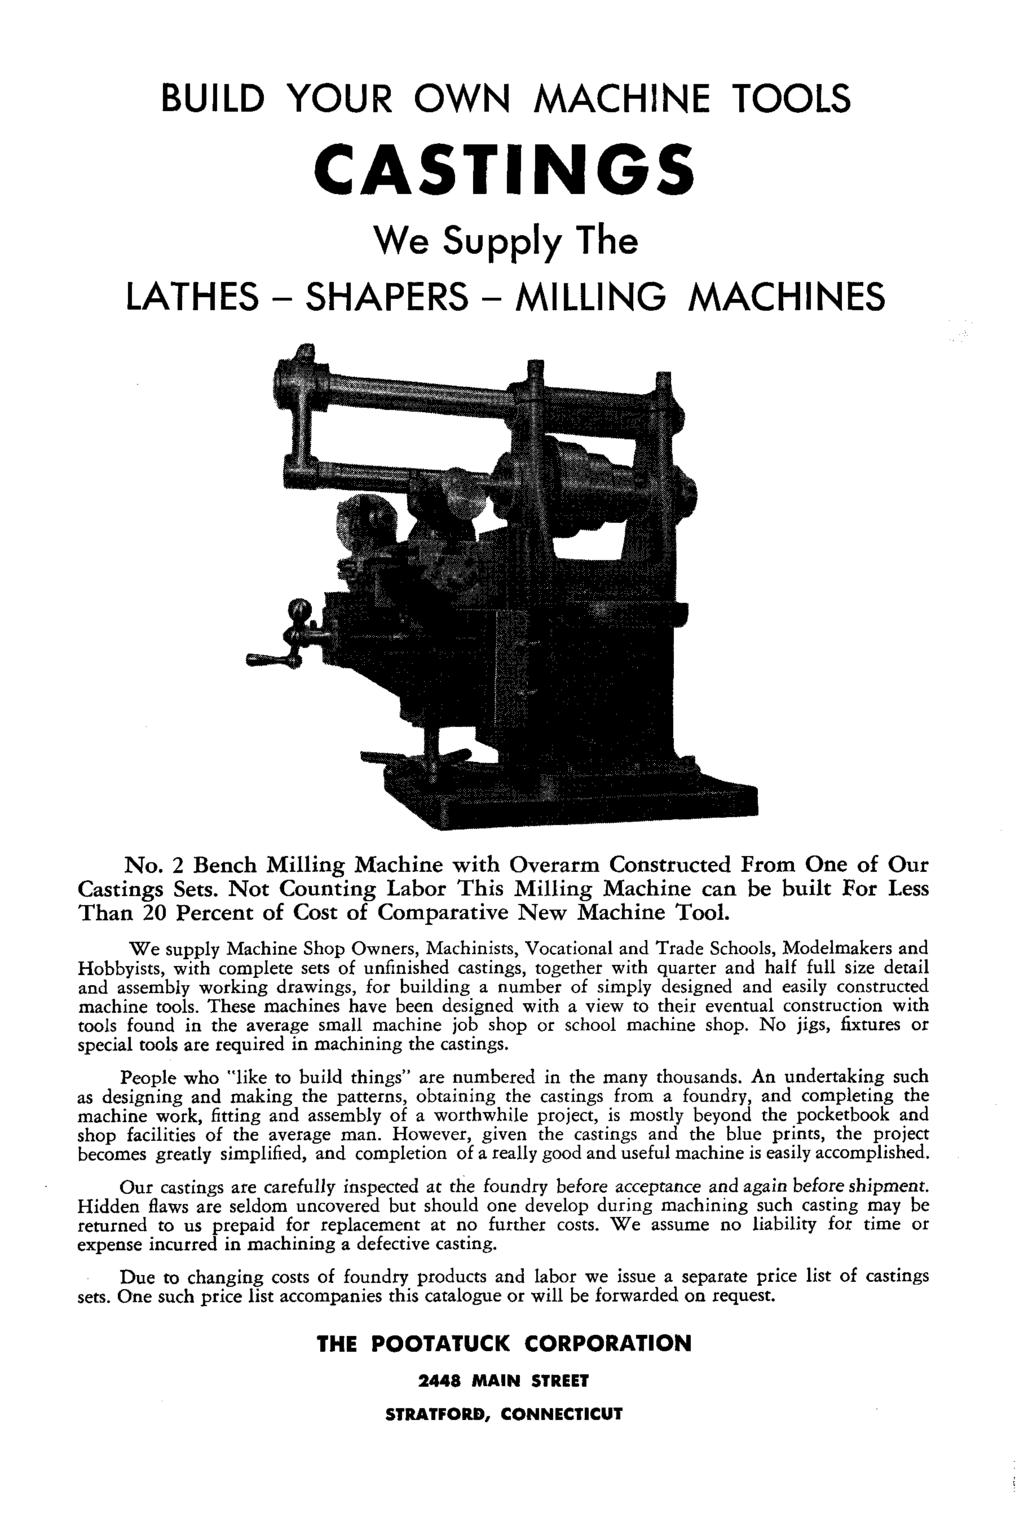 BUILD YOUR OWN MACHINE TOOLS CASTINGS We Supply The LATHES - SHAPERS - MILLING MACHINES No. 2 Bench Milling Machine with Overarm Constructed From One of Our Castings Sets.